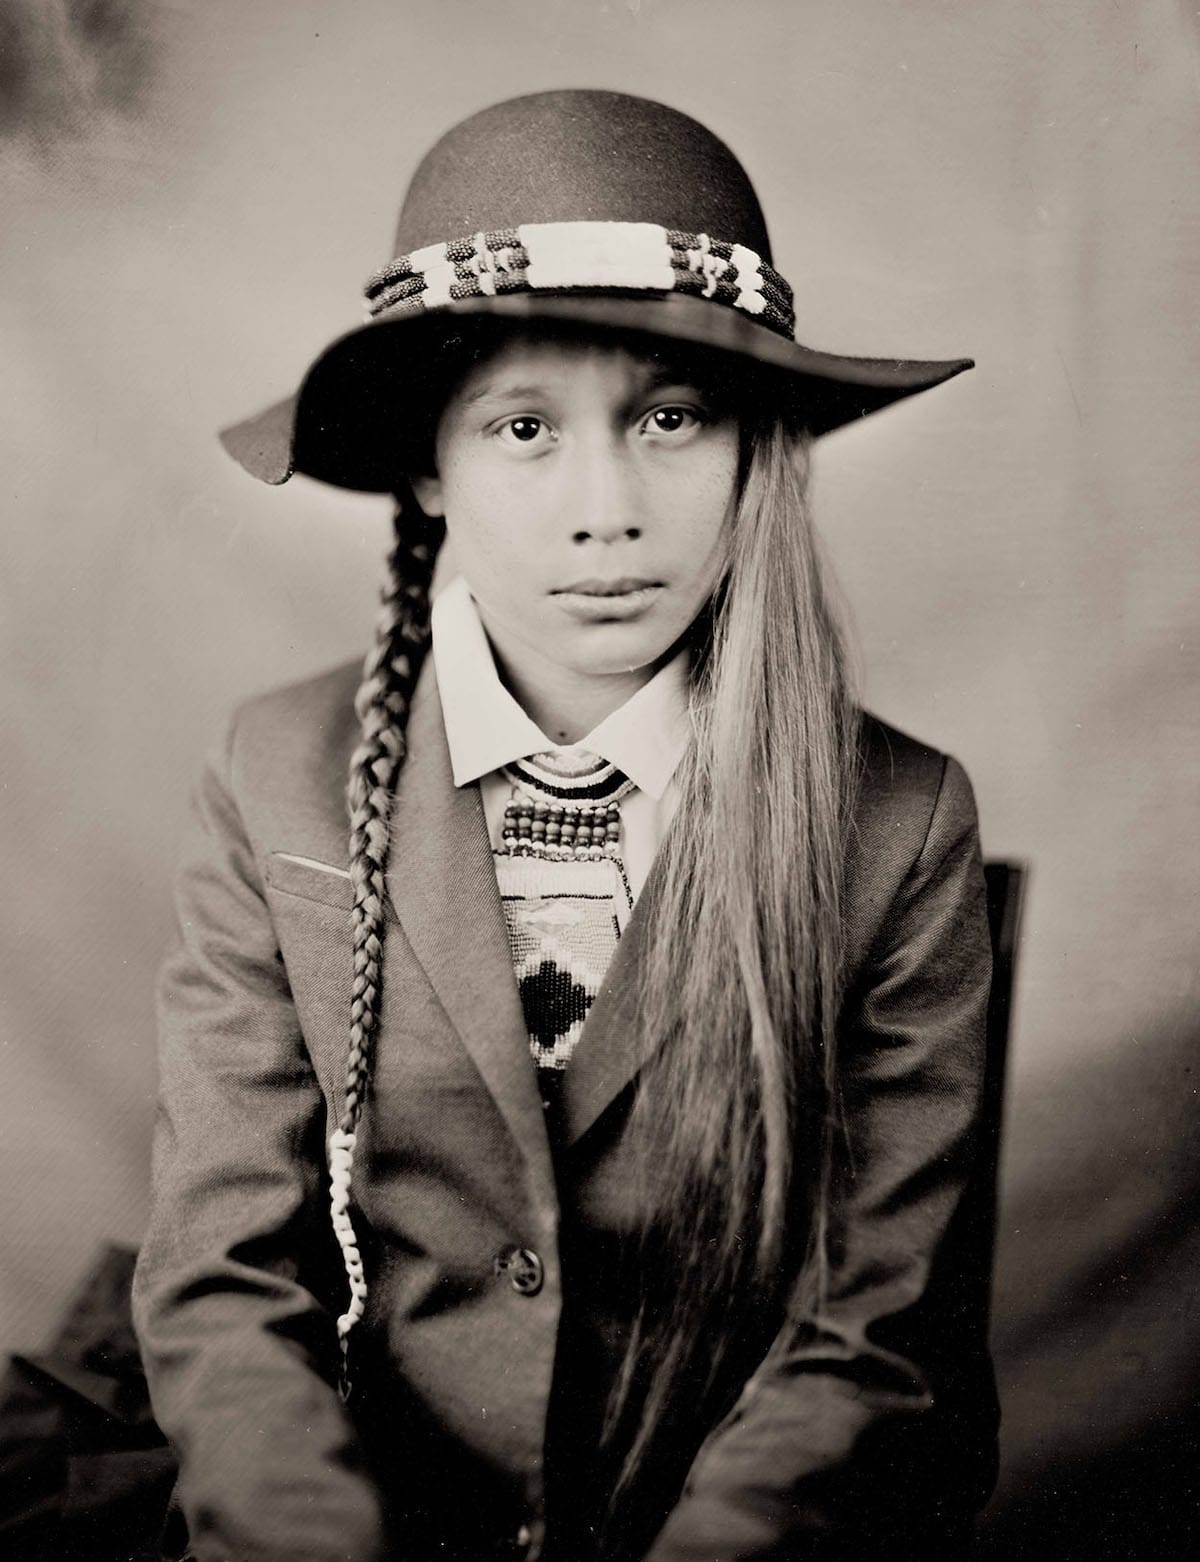 Wet Plate Portrait Photography by Shane Balkowitsch